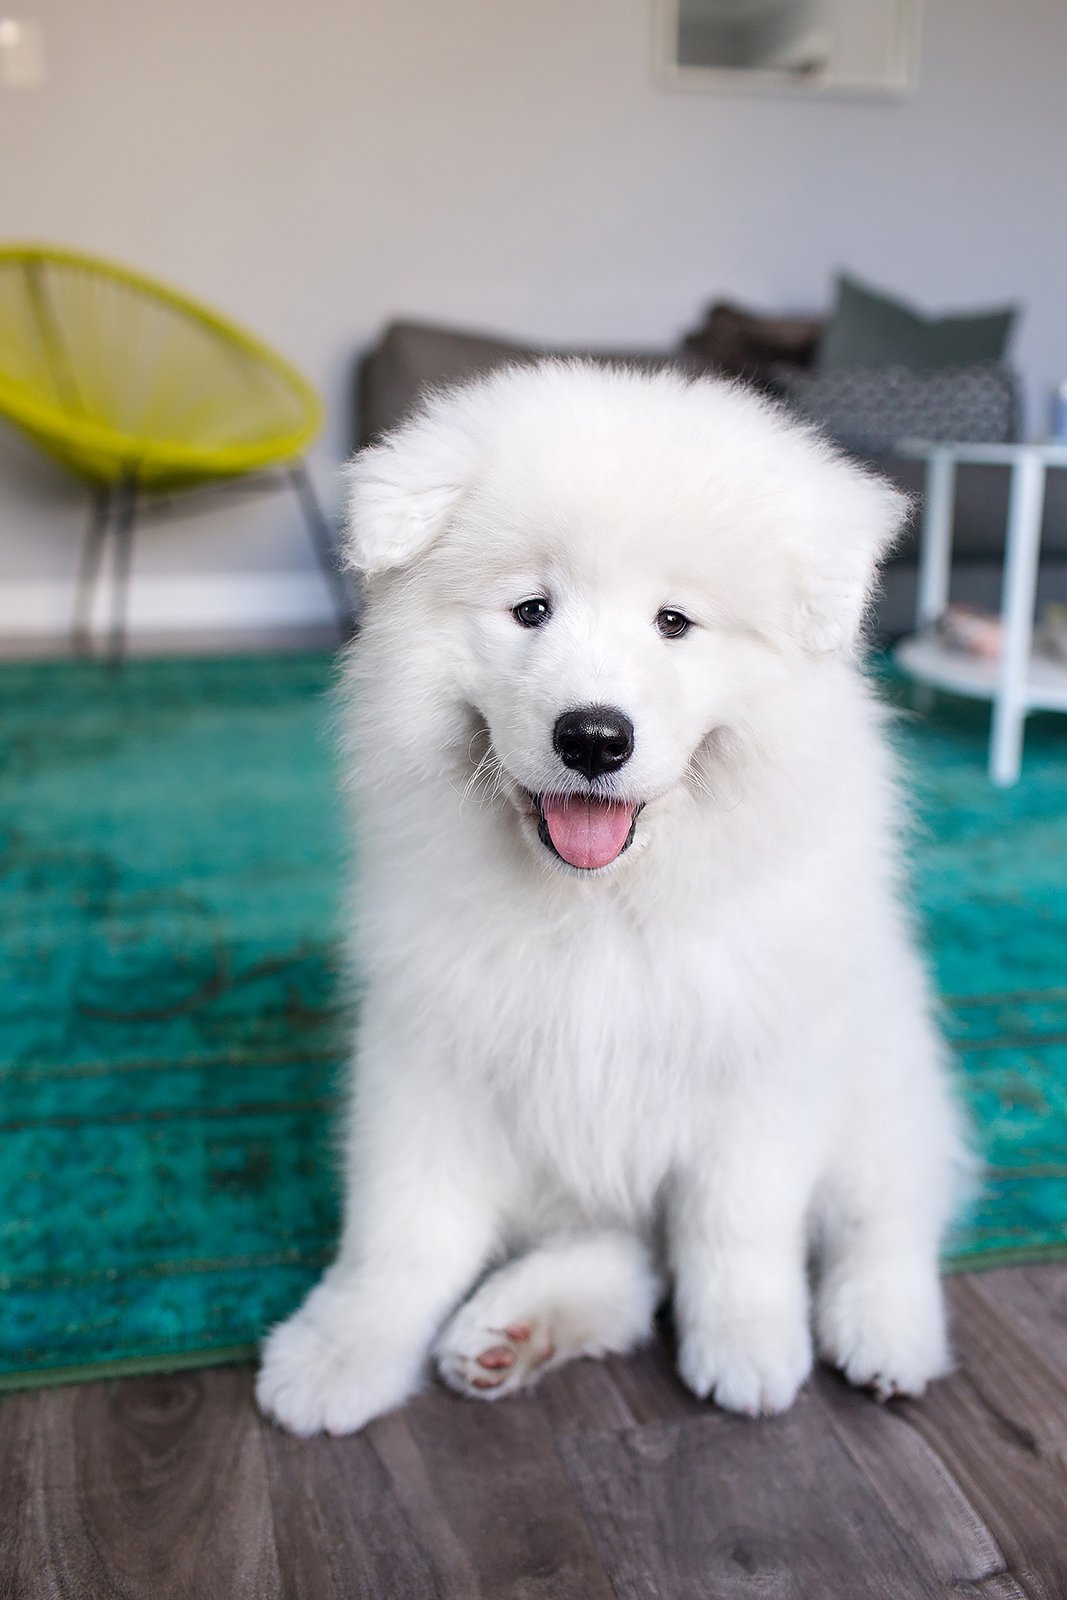 A fluffy white puppy with a smiling expression sits on the floor in a cozy living room. There is a green rug, a grey sofa with cushions, and a yellow chair in the background. The puppy's tongue is slightly out, exuding cuteness and playfulness.